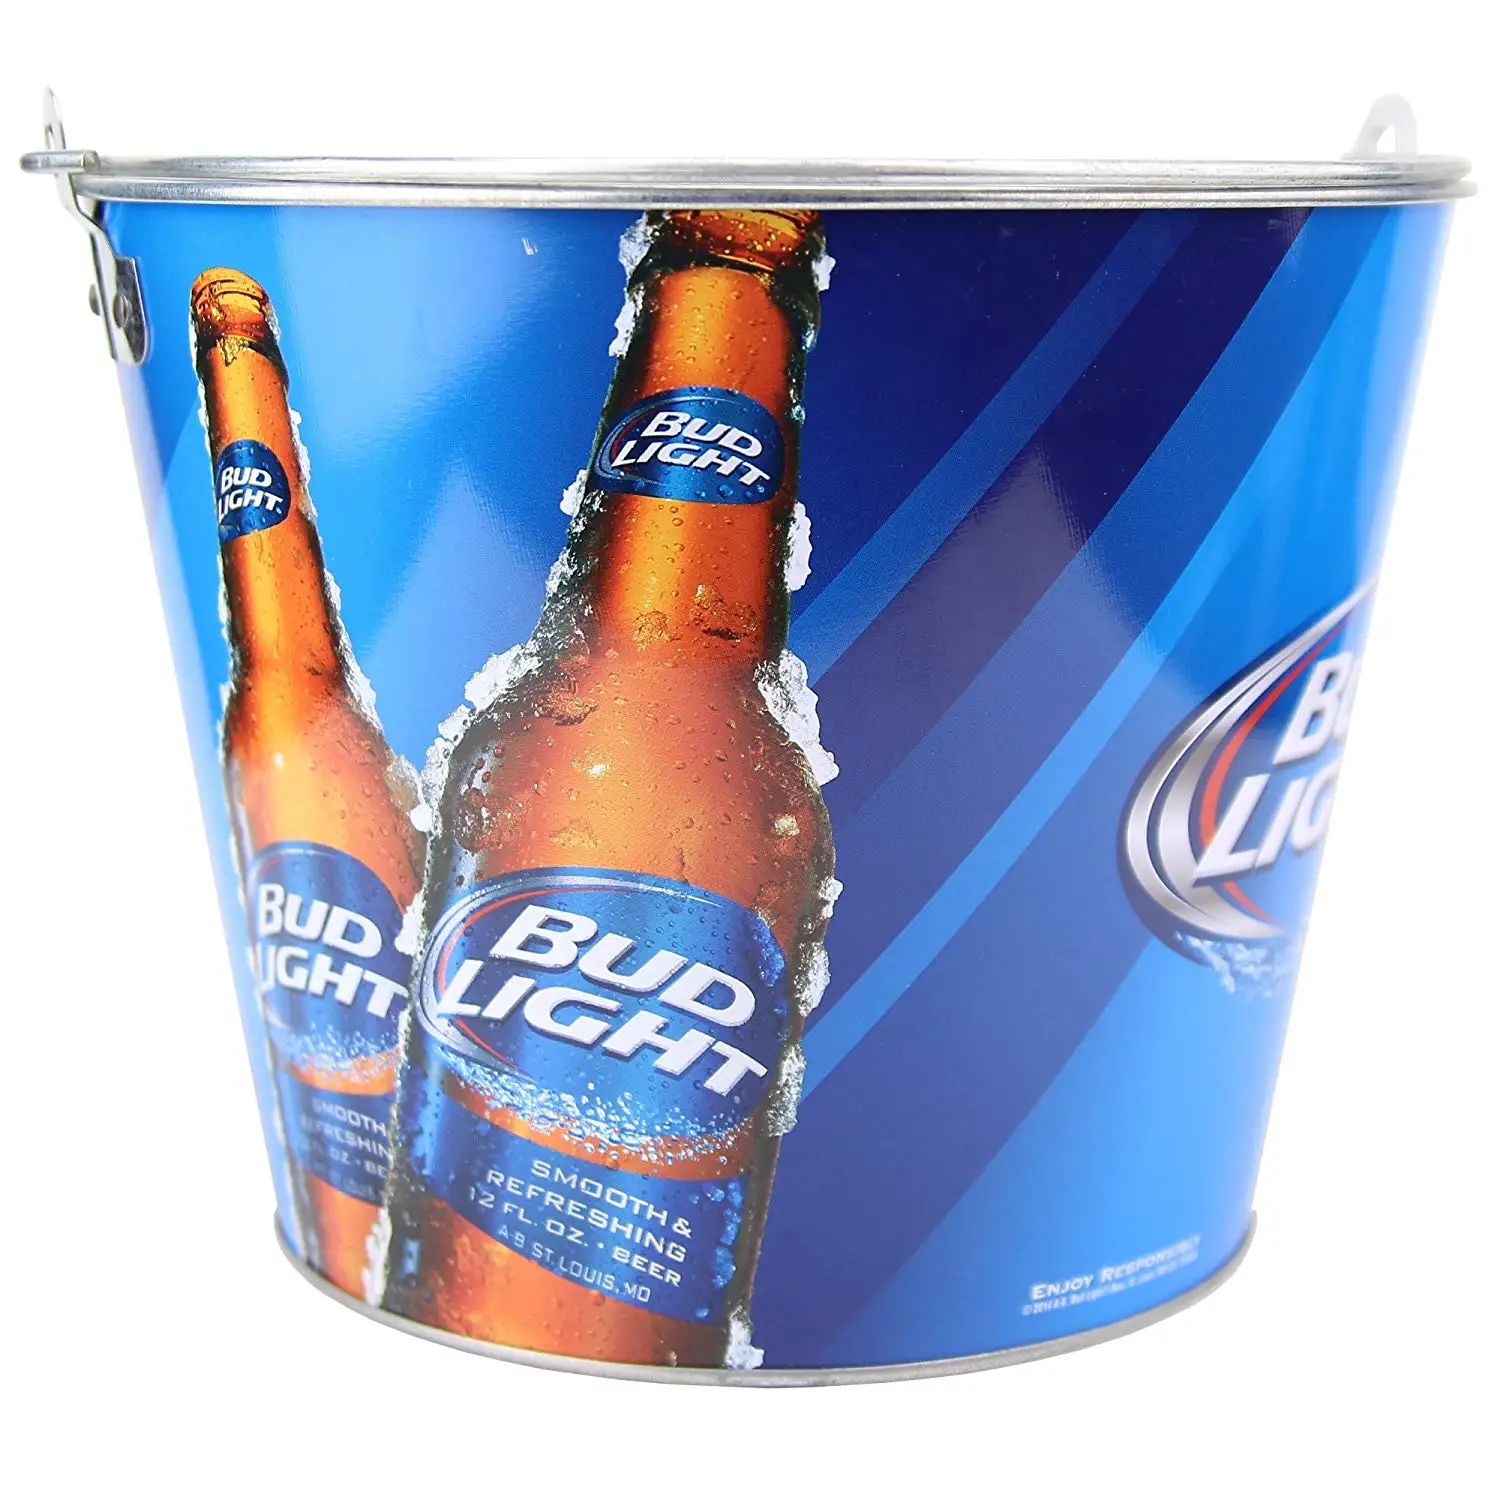 Set of 2 NEW & FS Budweiser Bud Light "The Summer Is Yours" 5 Quart Ice Bucket 